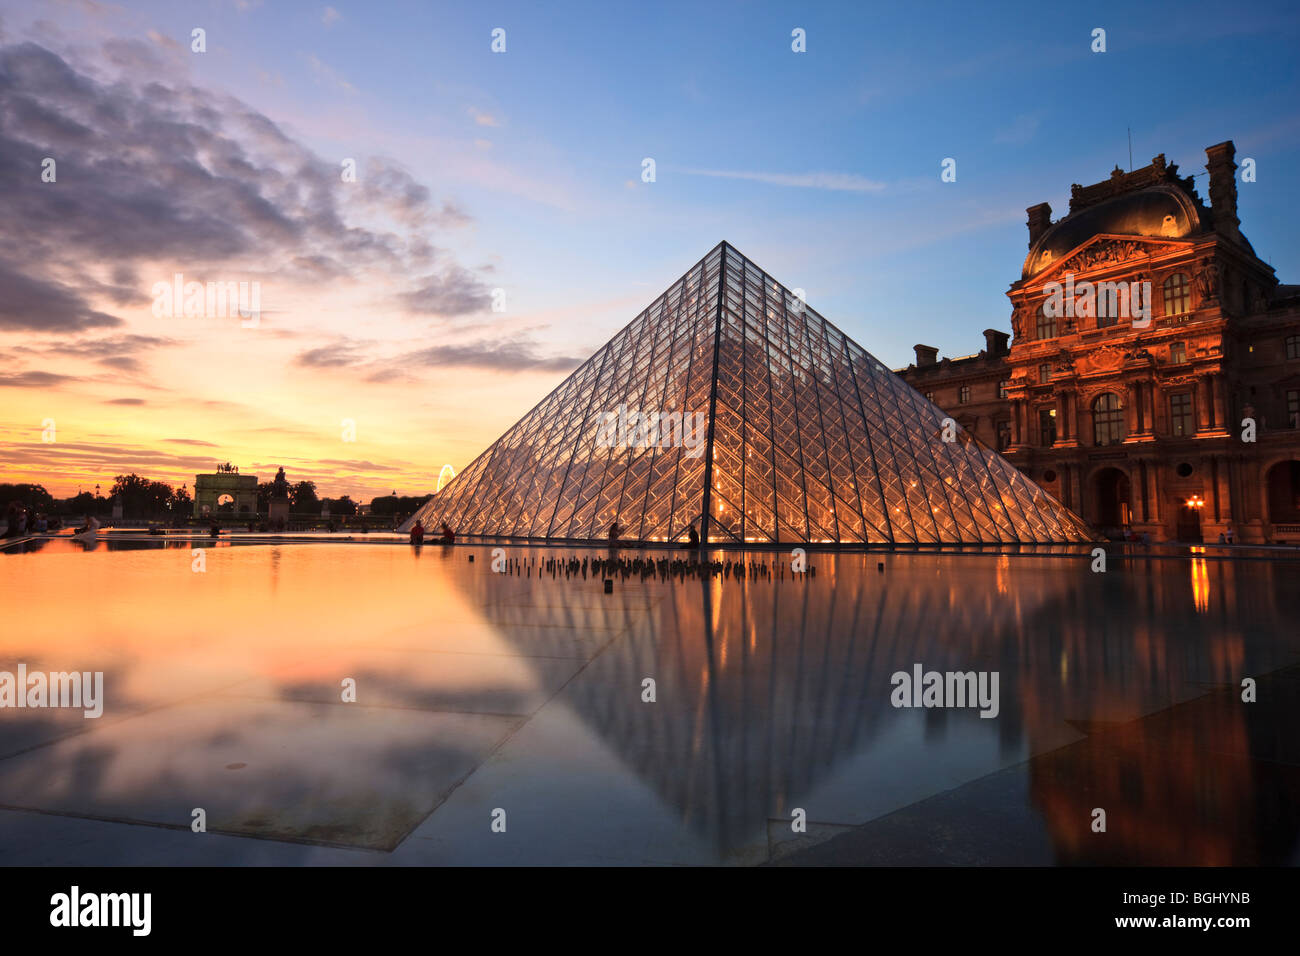 Louvre Pyramid, Paris, France. Taken at sunset on 22 August 2009. Stock Photo